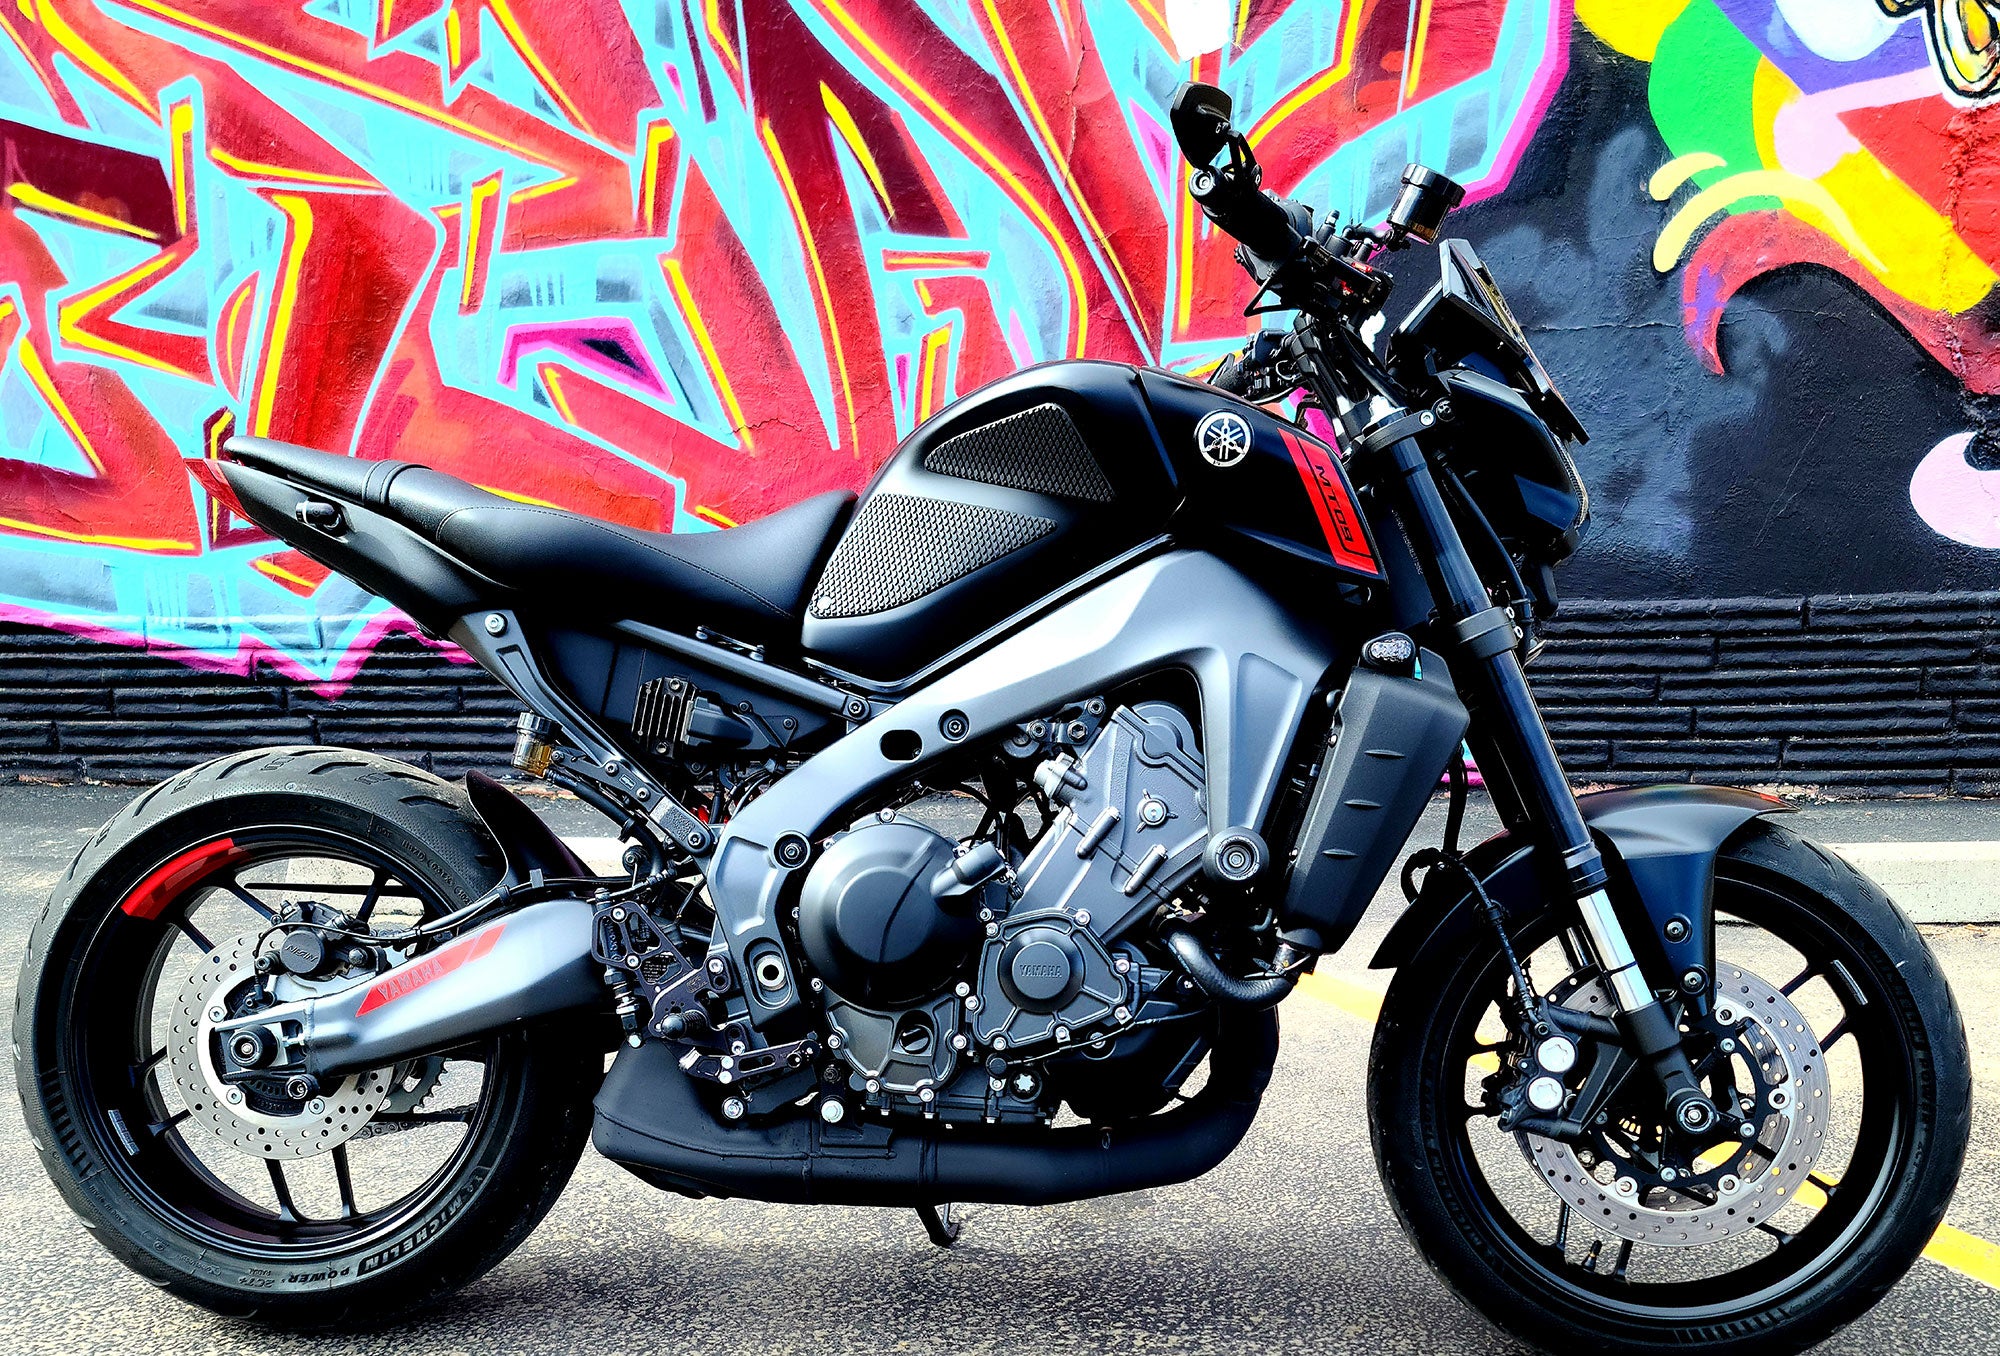 YAMAHA MT-07 STICKERS DECAL GRAPHIC KIT